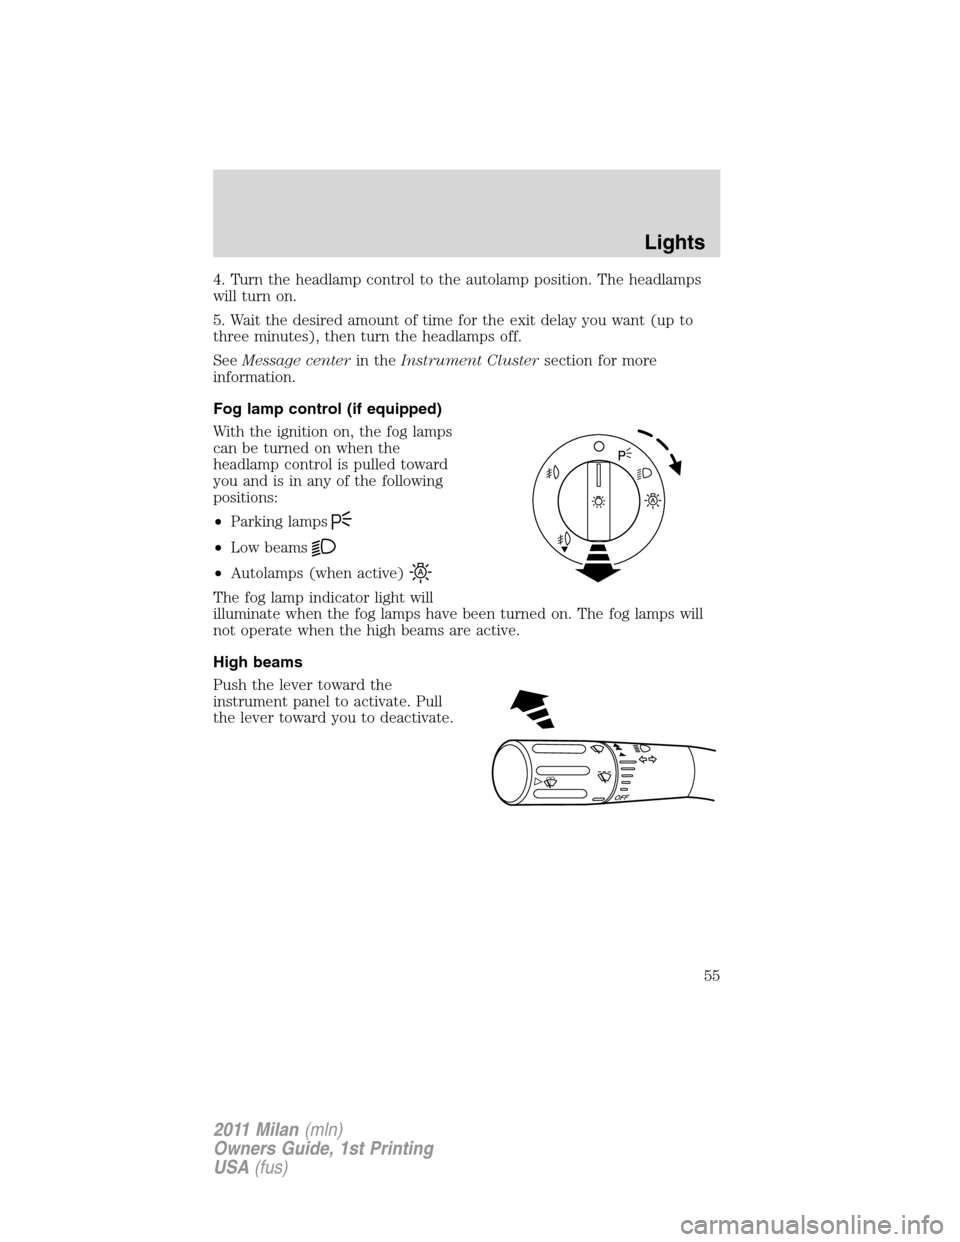 Mercury Milan 2011  Owners Manuals 4. Turn the headlamp control to the autolamp position. The headlamps
will turn on.
5. Wait the desired amount of time for the exit delay you want (up to
three minutes), then turn the headlamps off.
Se